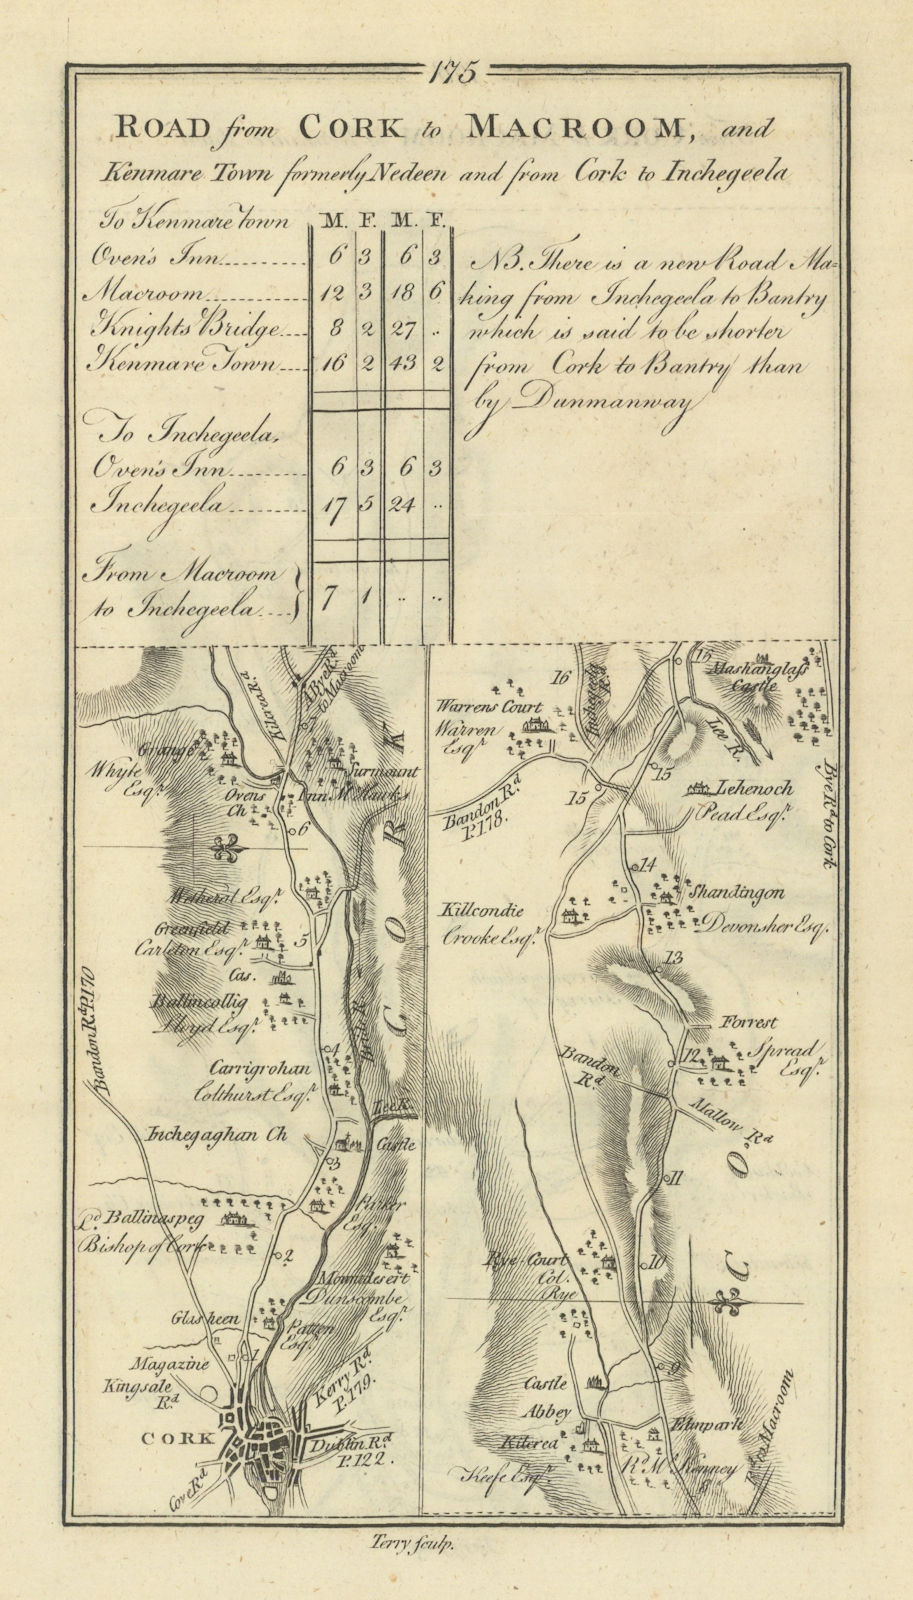 Associate Product #175 Cork to Macroom & Kenmare town. TAYLOR/SKINNER 1778 old antique map chart